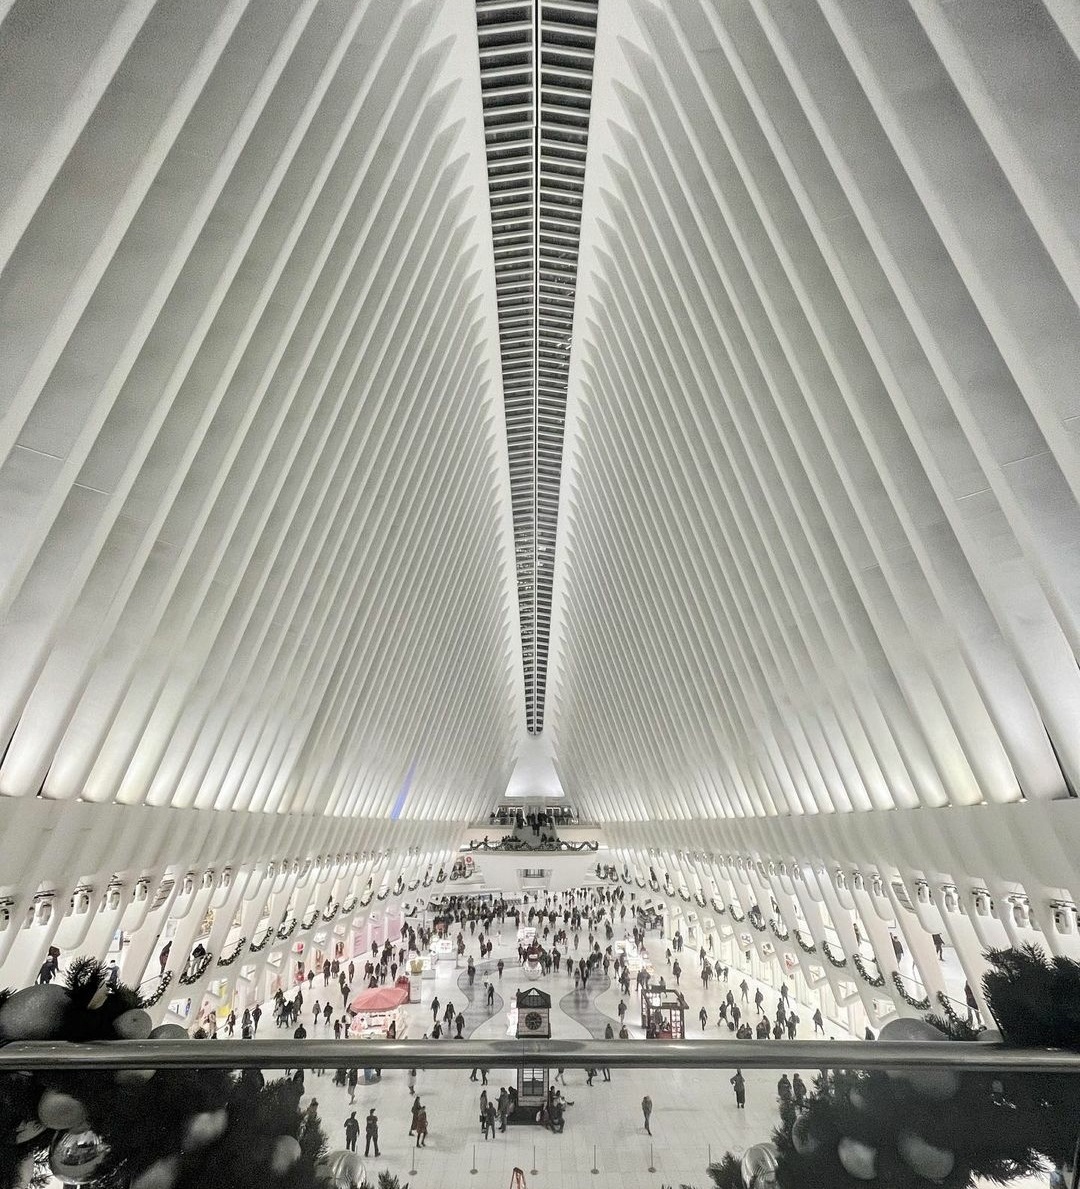 NYC Oculus (With Proper Scale)